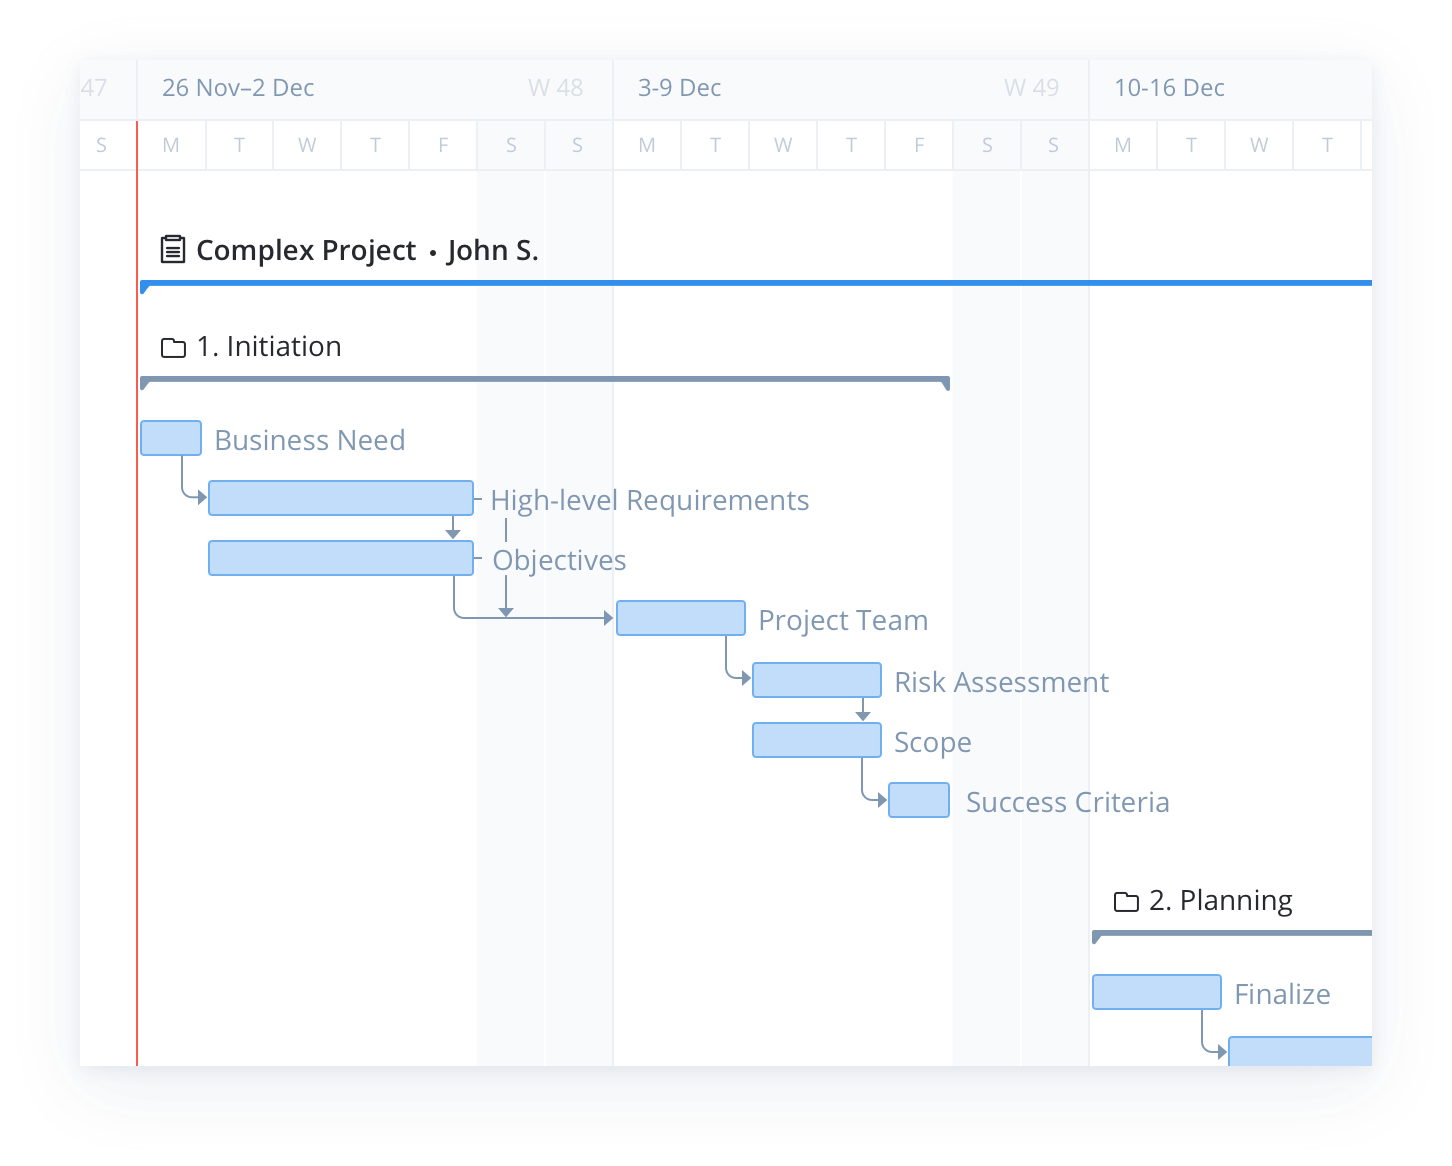 Gantt Chart For Multiple Projects - How To Make A Gantt Chart For ...